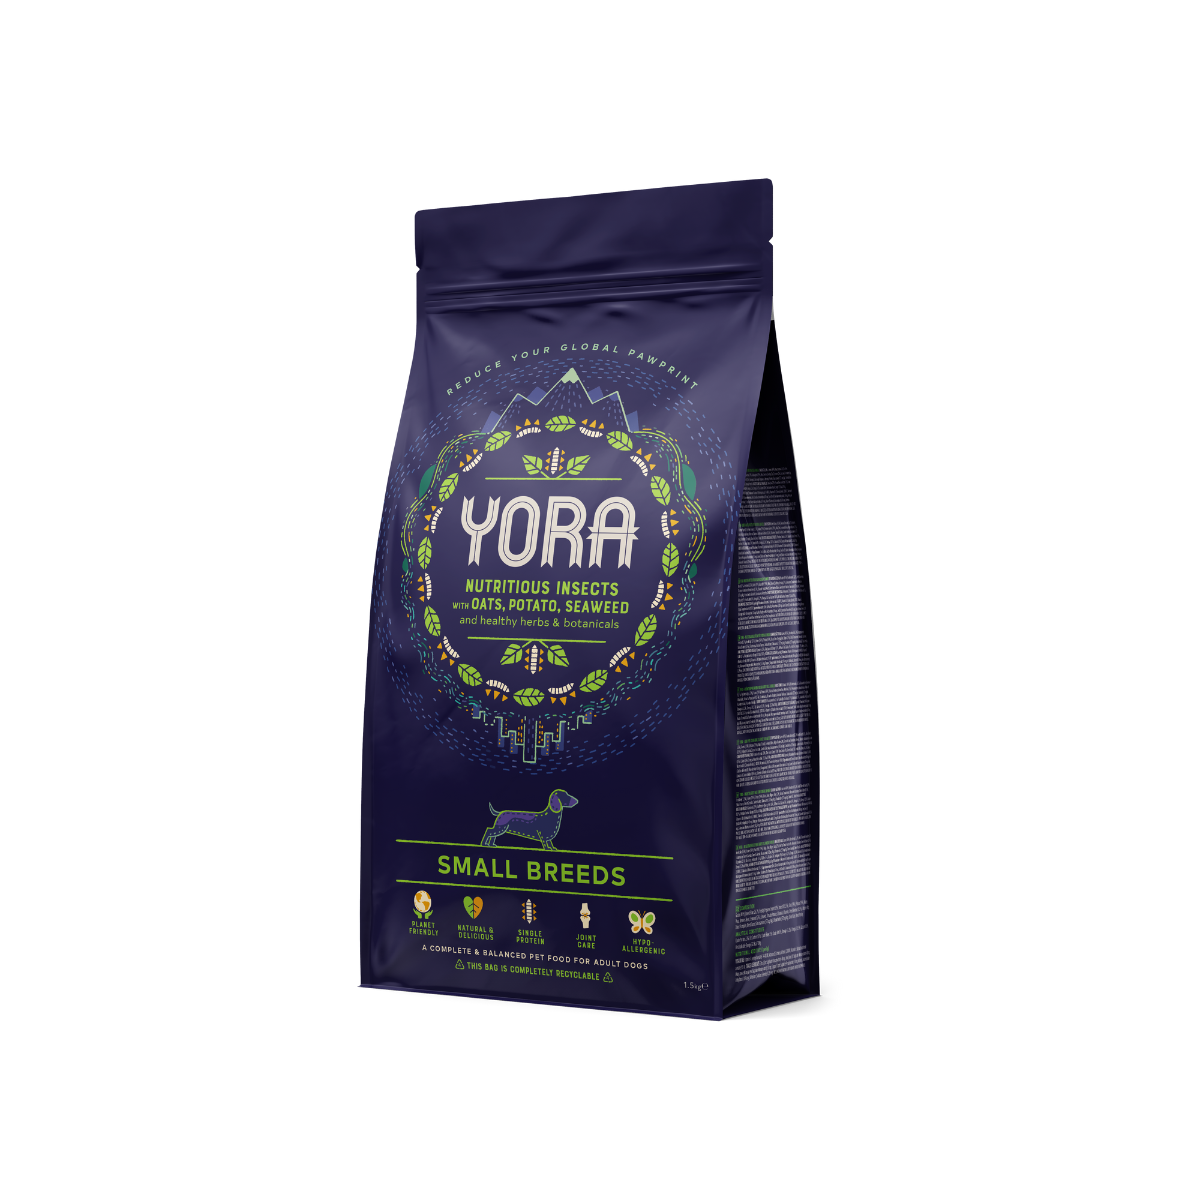 YORA insect super food for small breed dogs